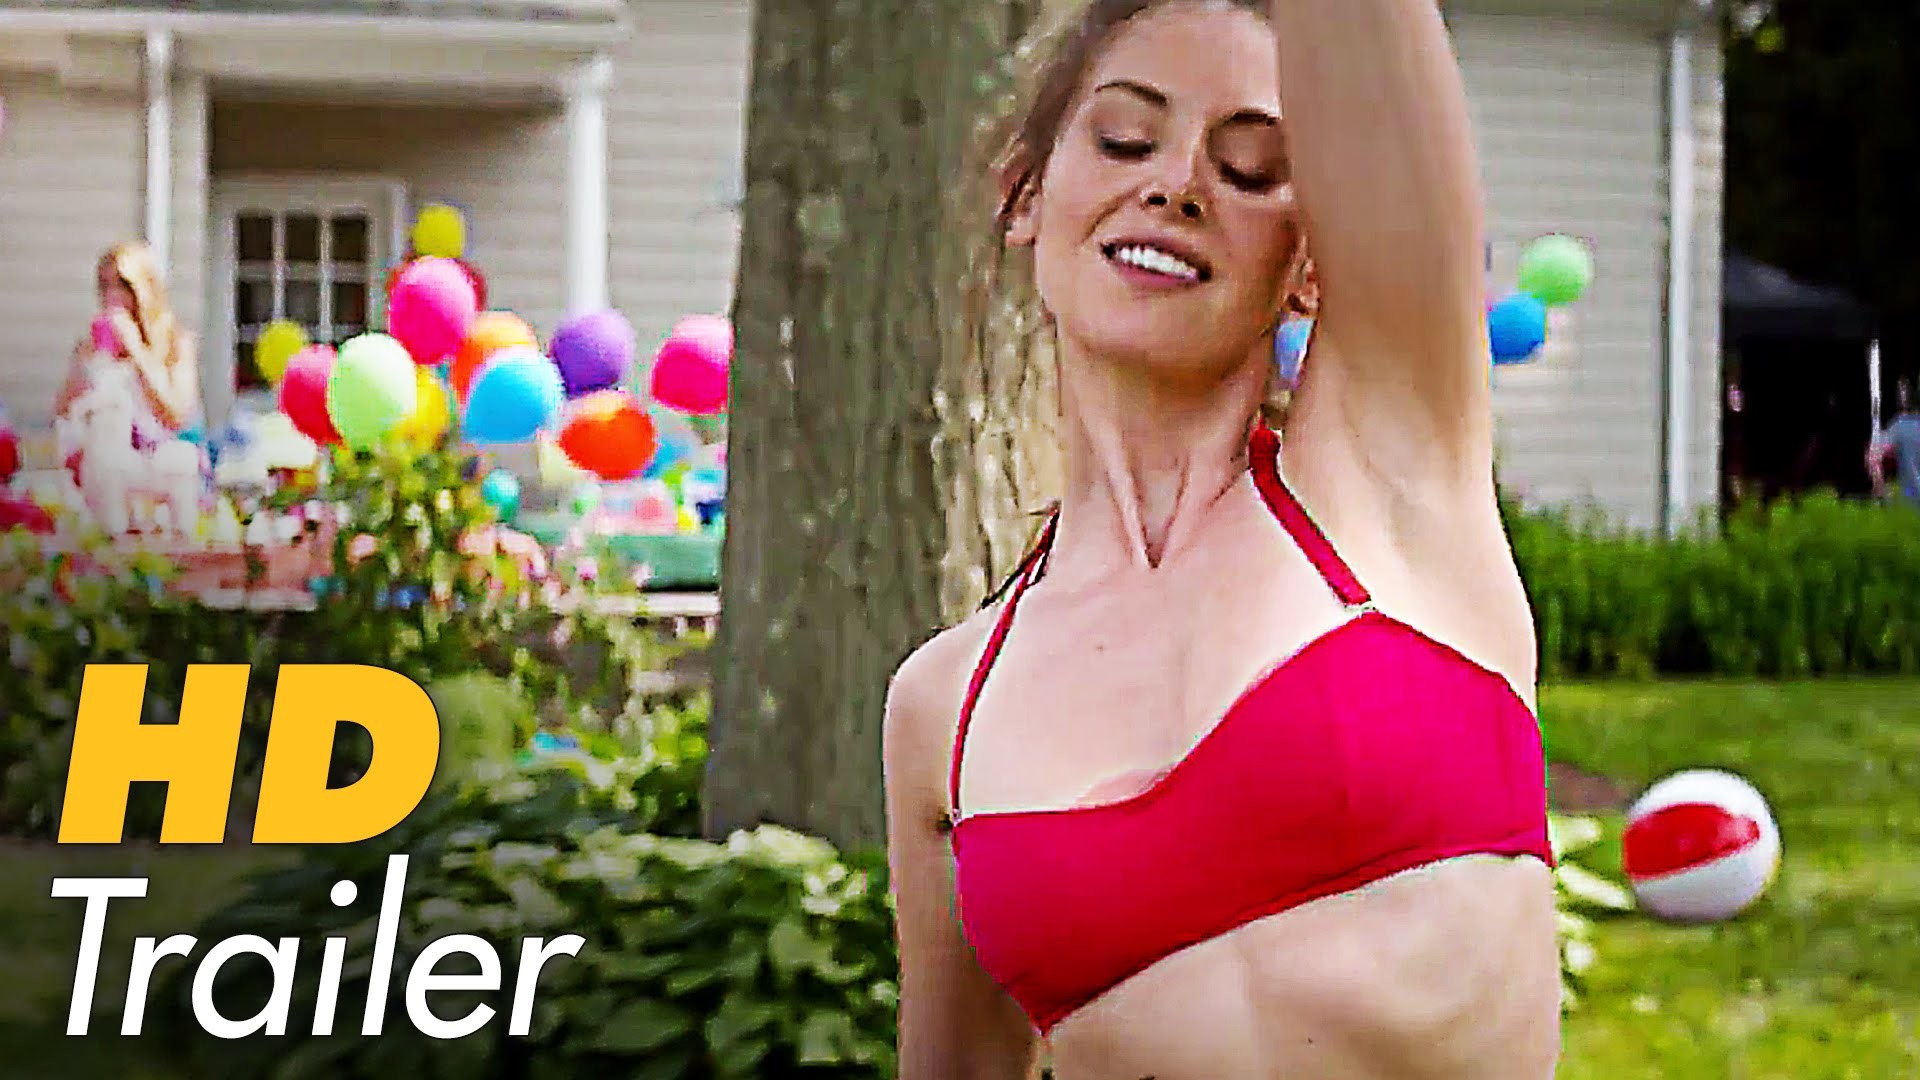 1920x1080 SLEEPING WITH OTHER PEOPLE Trailer (2015) Jason Sudeikis, Alison Brie Sex  Comedy - YouTube